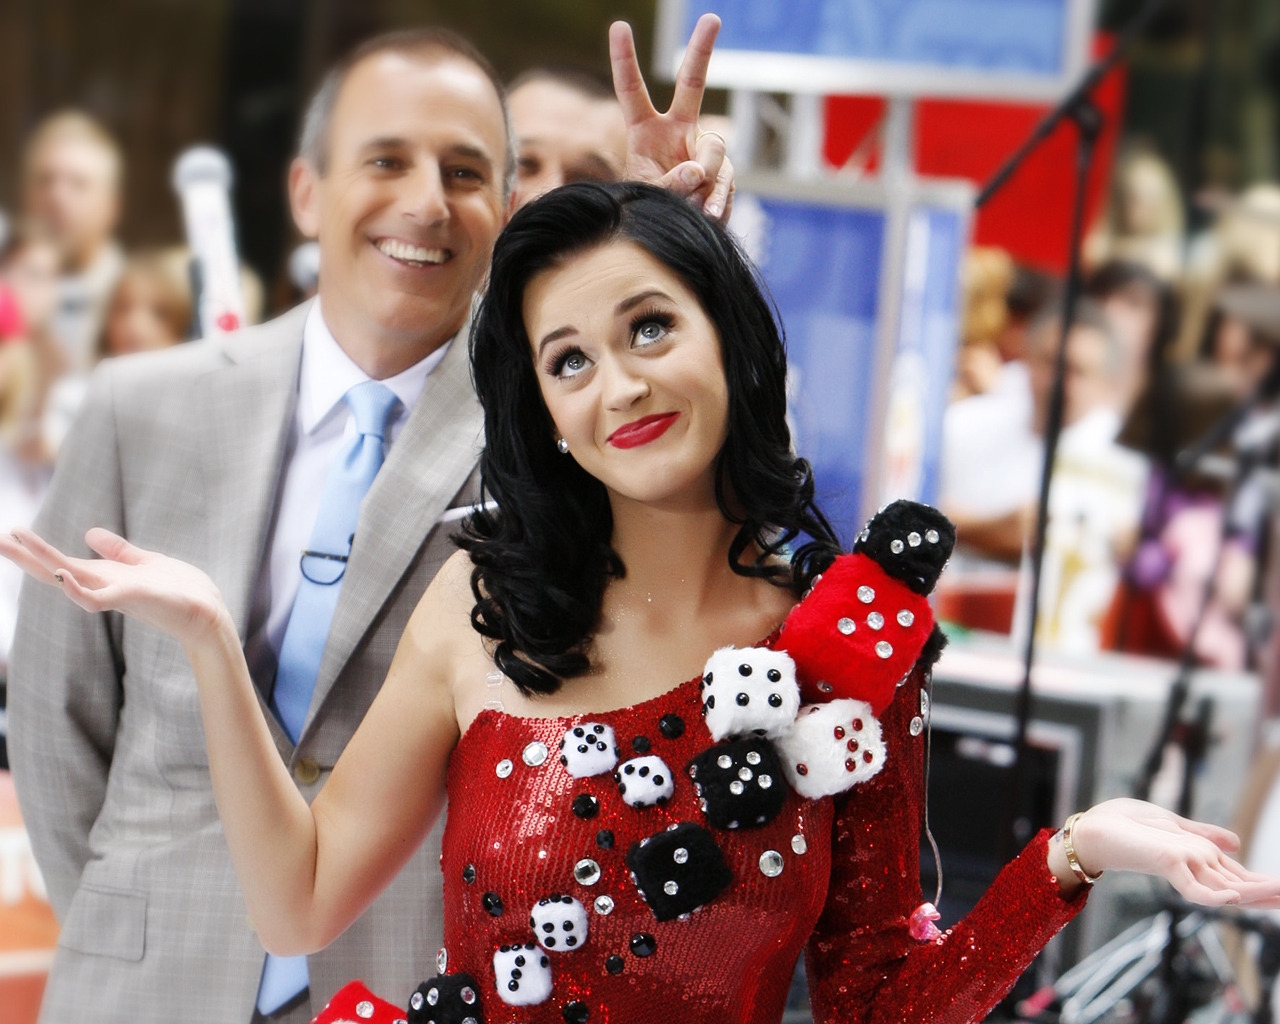 Funny Katy Perry for 1280 x 1024 resolution